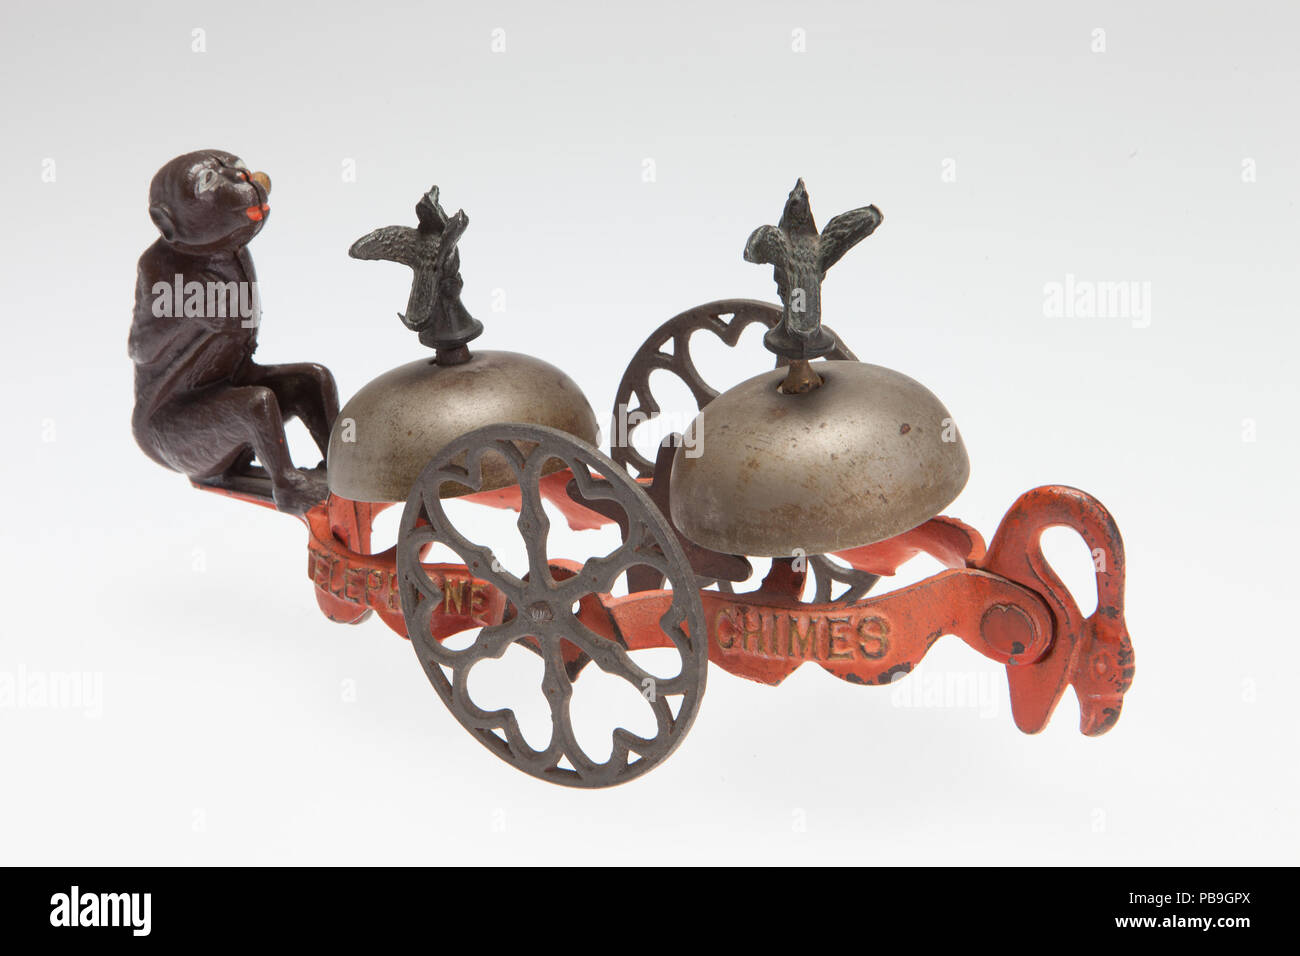 . English: Hello Hello Telephone Chimes pull toy produced by the Gong Bell Manufacturing Company. The toy features a cast monkey and two ringing bells. Title: Hello Hello Telephone Chimes Bell Ringer Pull Toy . between 1900 and 1920 751 Hello Hello Telephone Chimes Bell Ringer Pull Toy Stock Photo